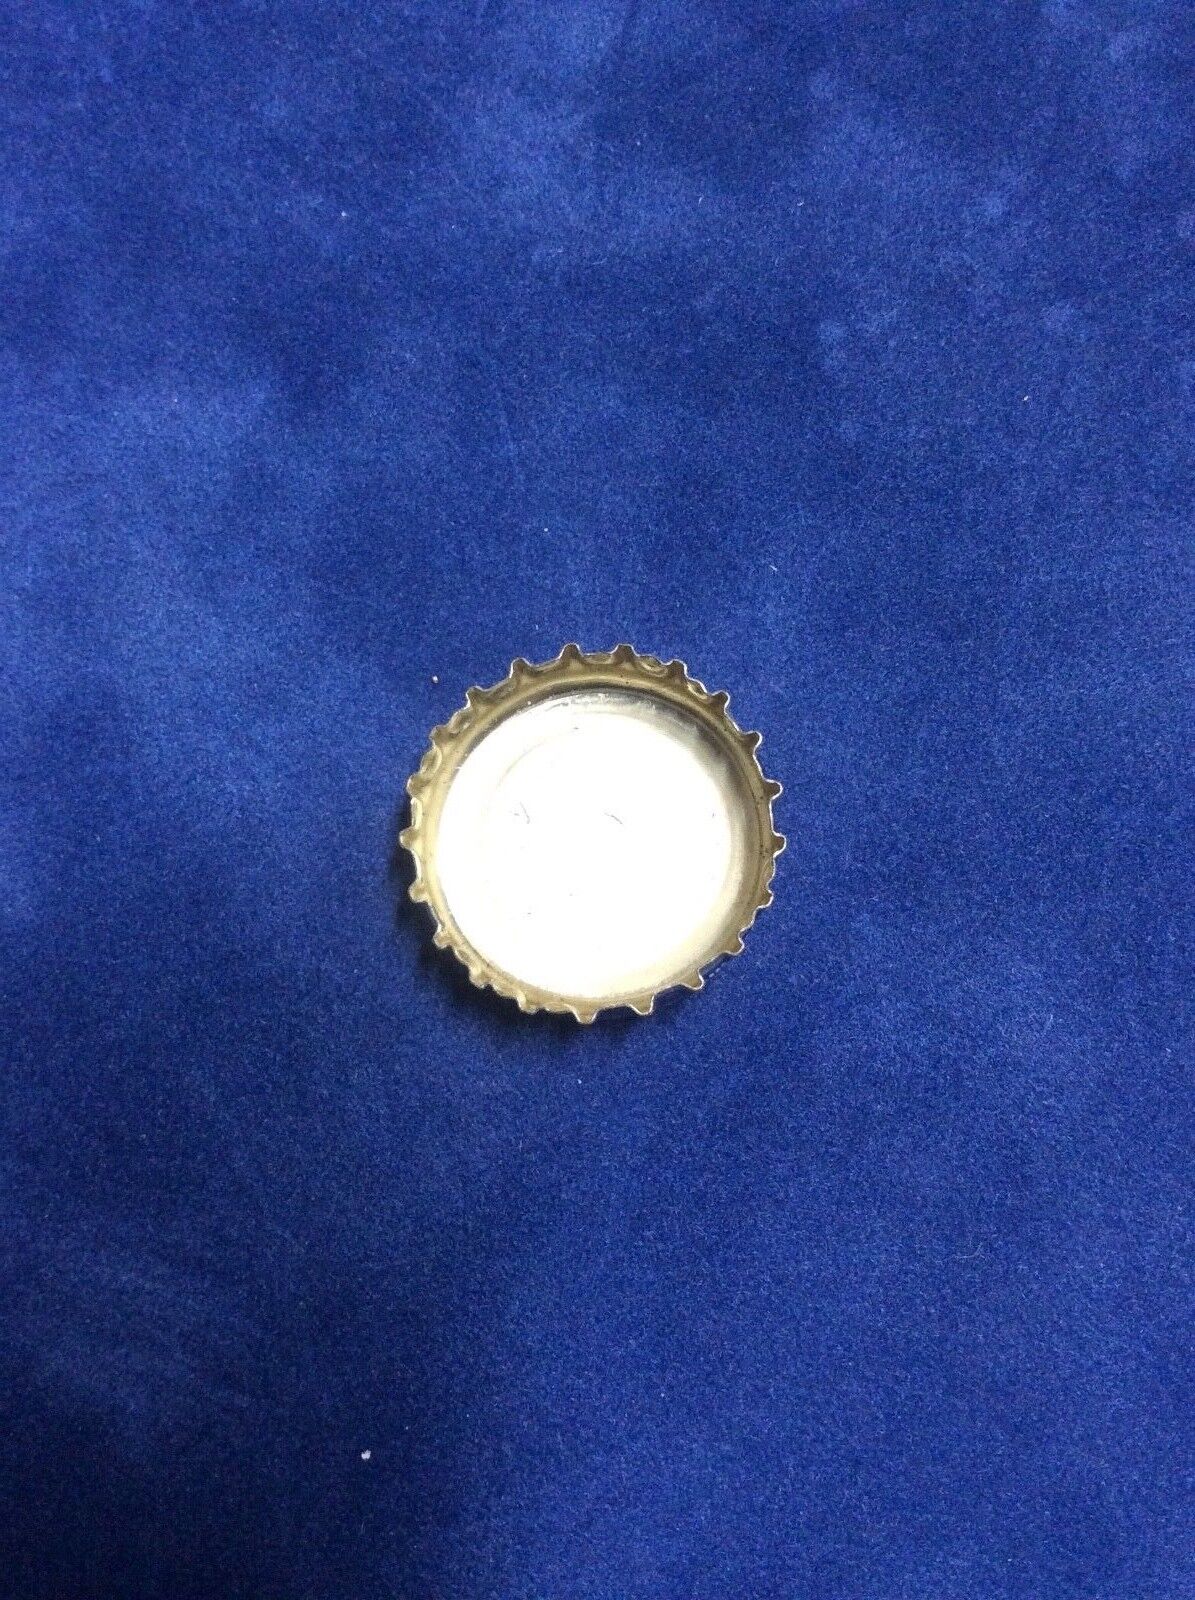 Stanley Cup Champ Toronto Maple Leafs 1932 Limited Edition Labatts Beer Cap 2001